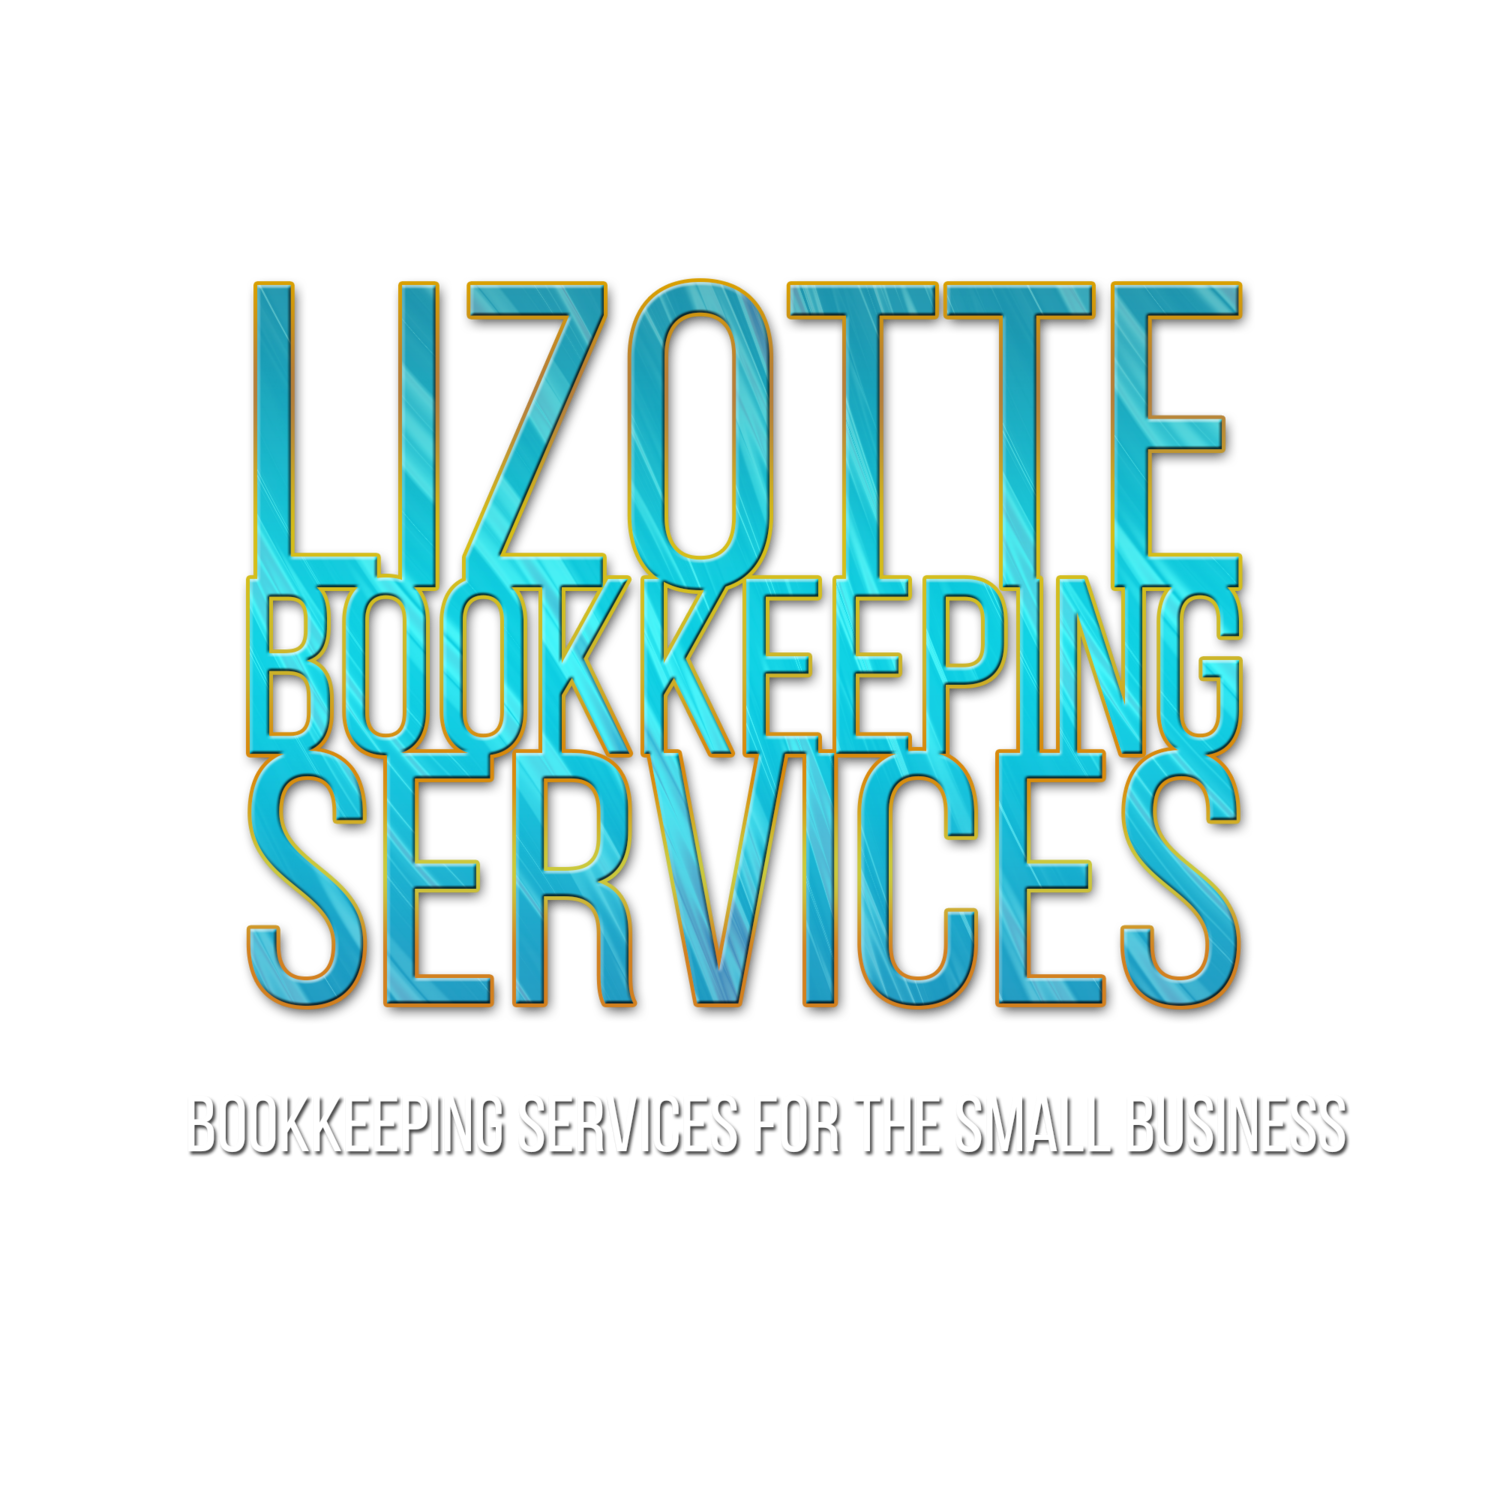 Lizotte Bookkeeping Services